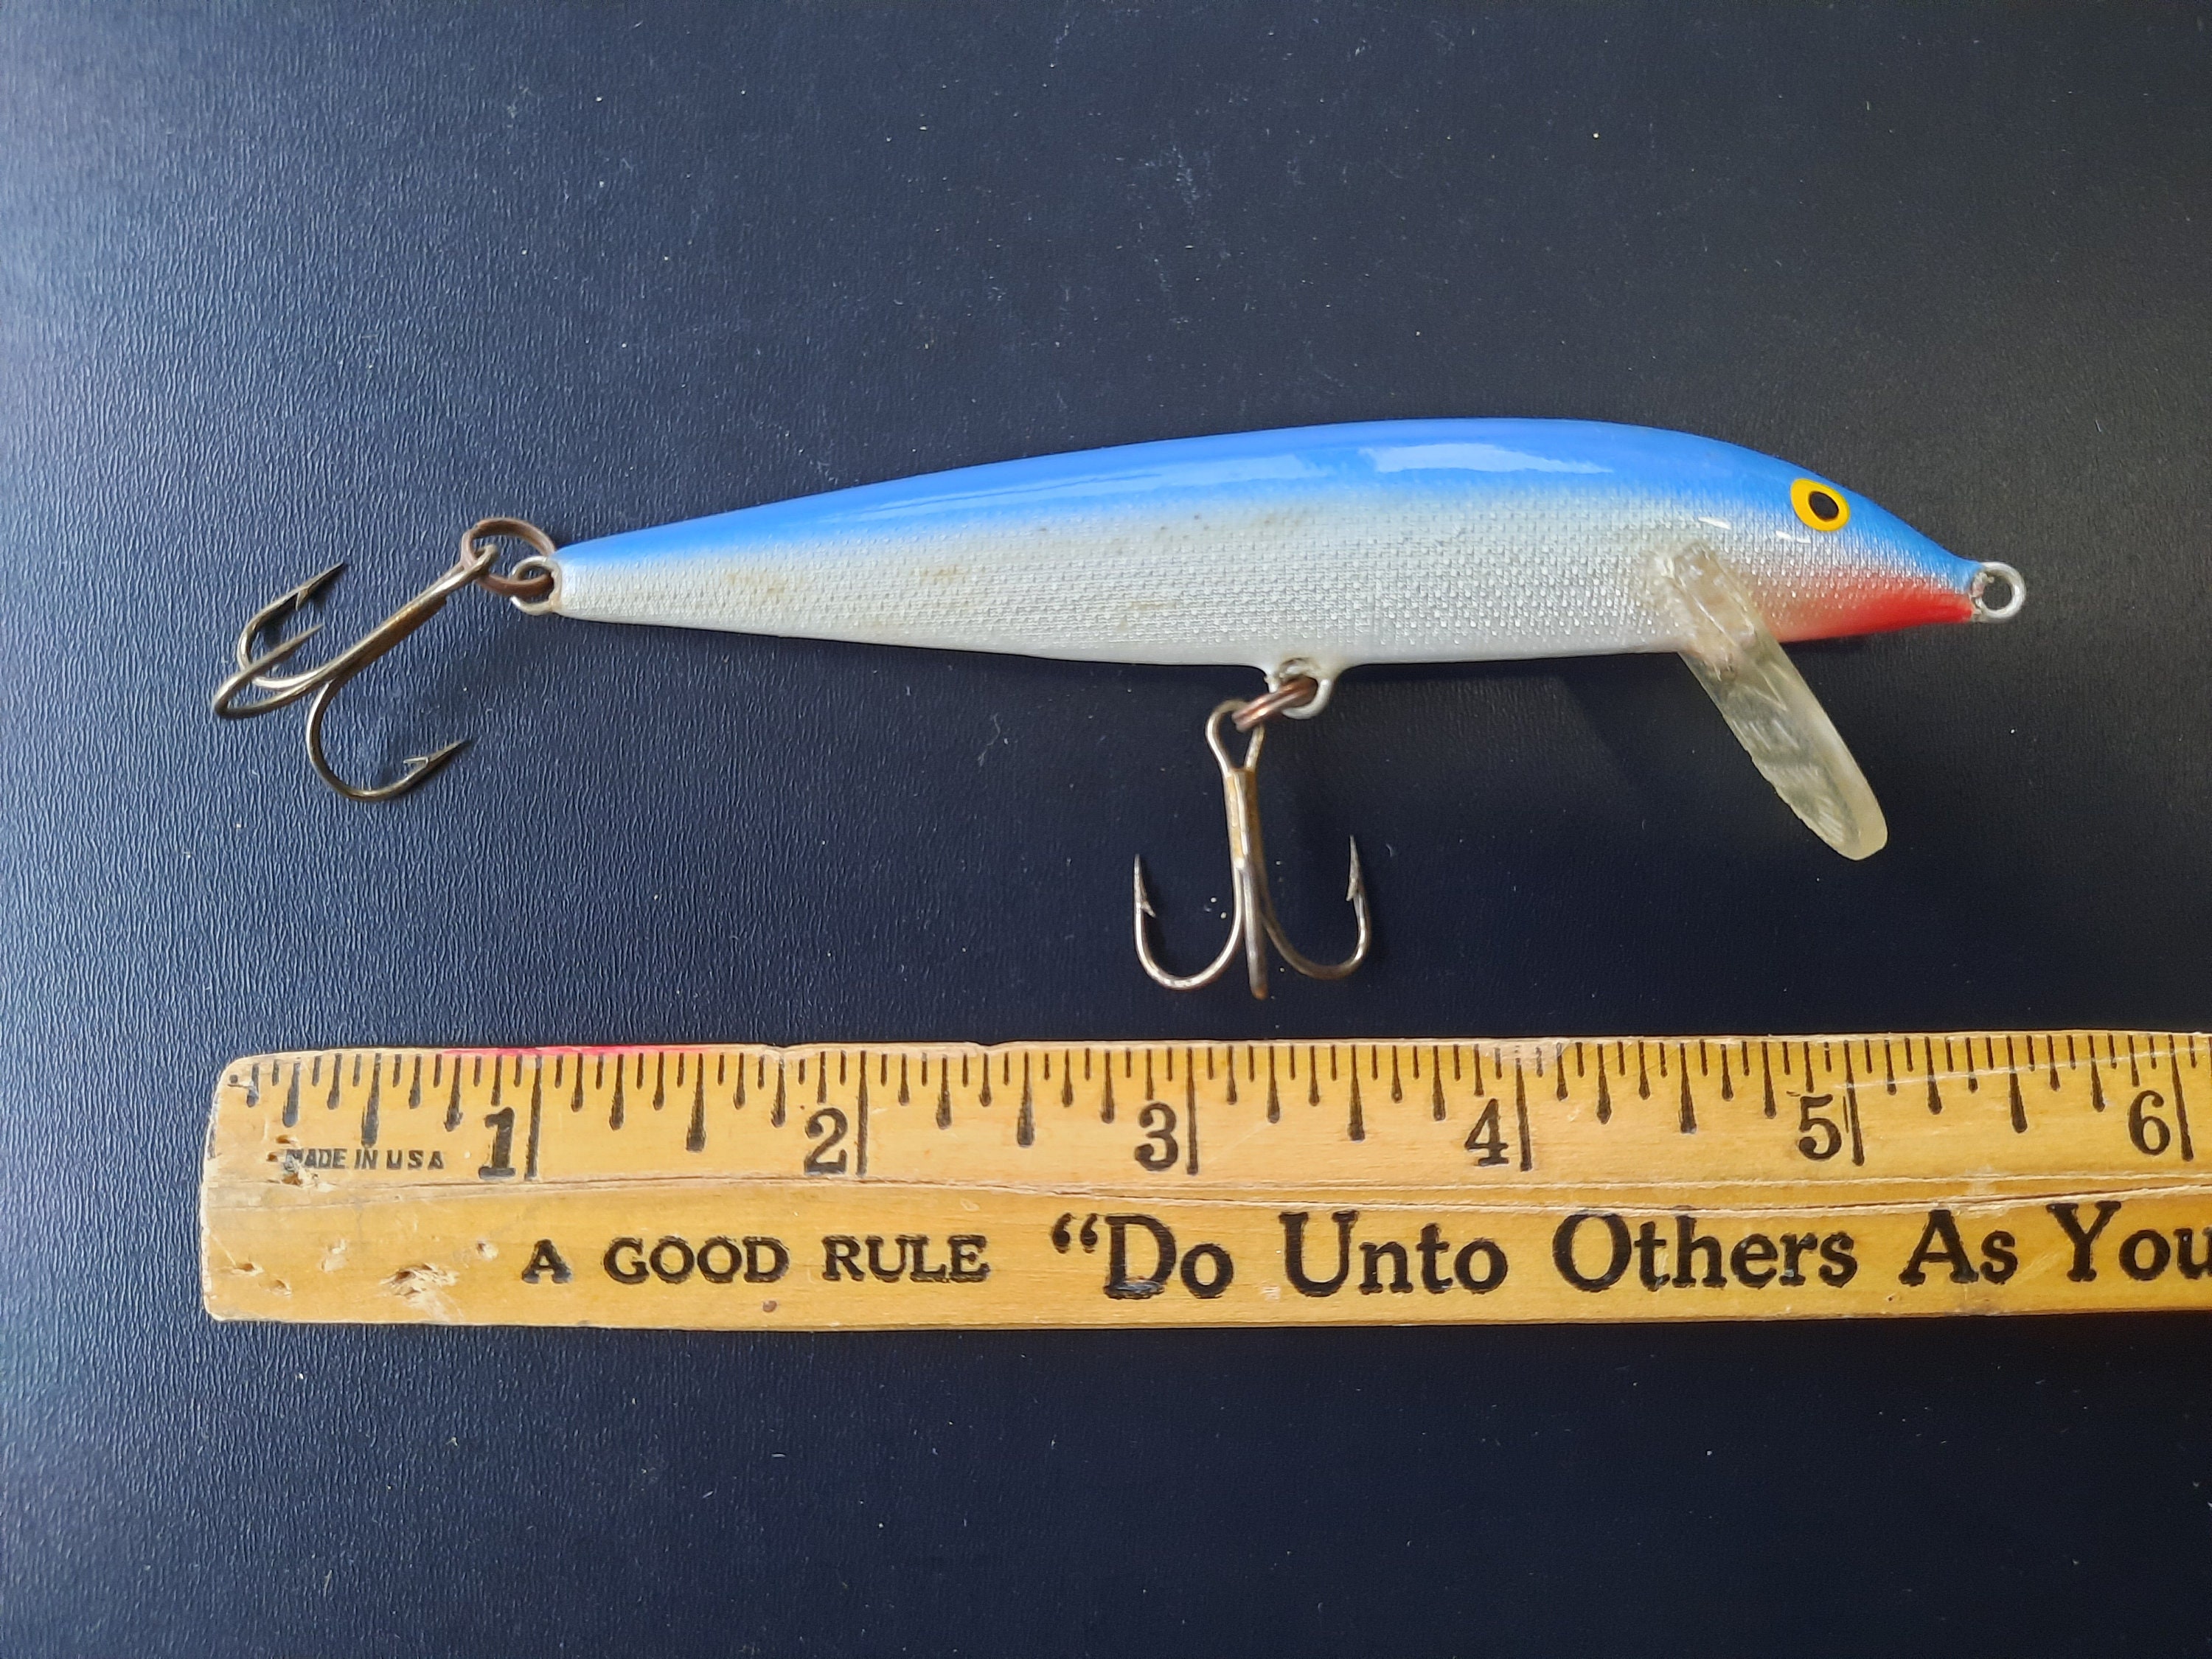 Rapala Original Floater 07 Fishing lure, 2.75-Inch, Blue, Topwater Lures -   Canada